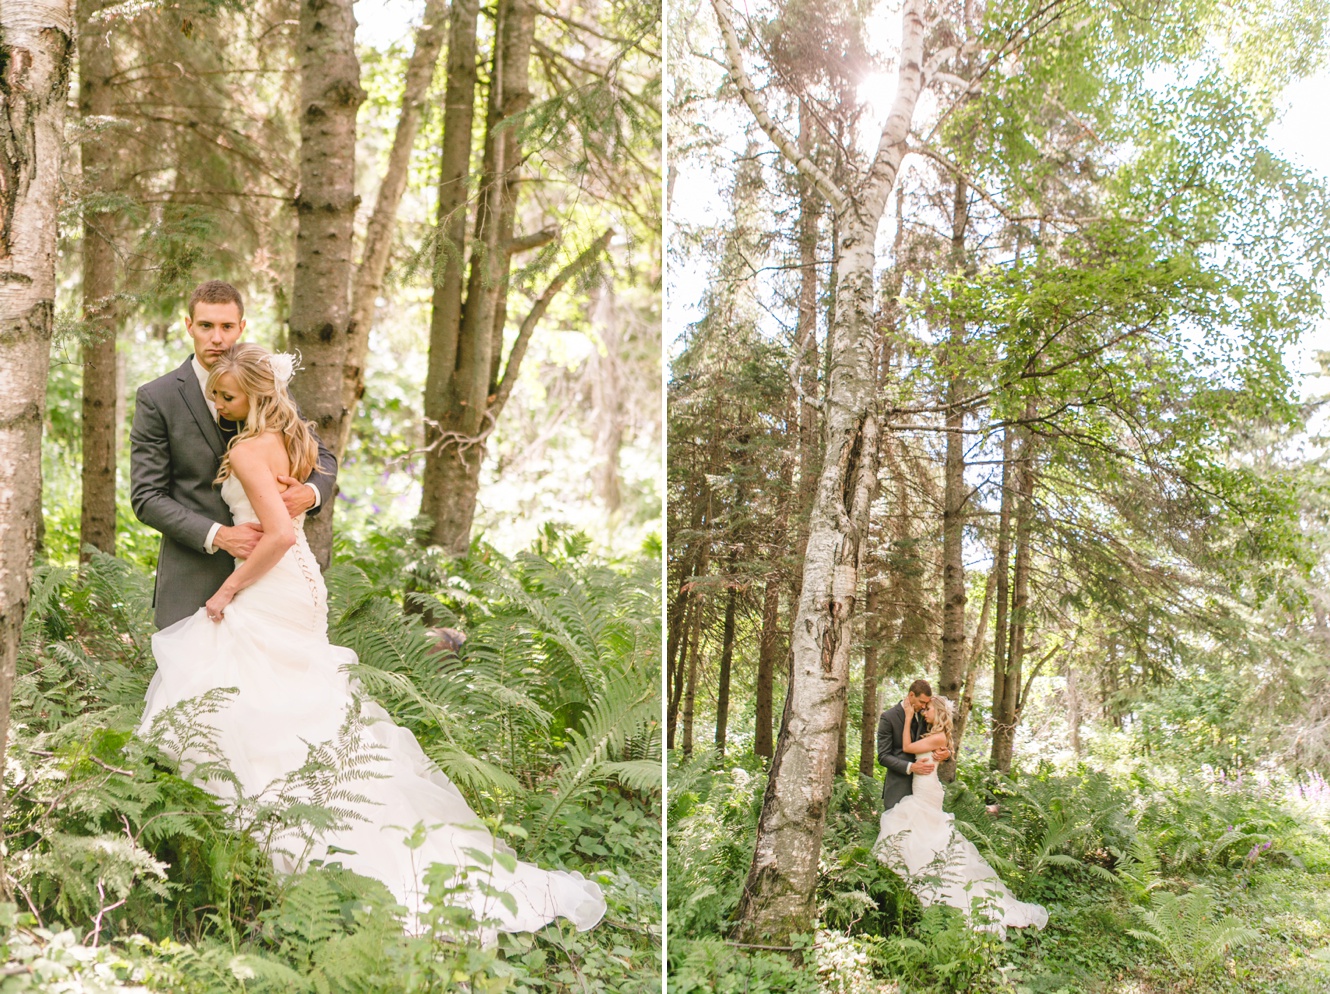 Ethereal forest wedding photo